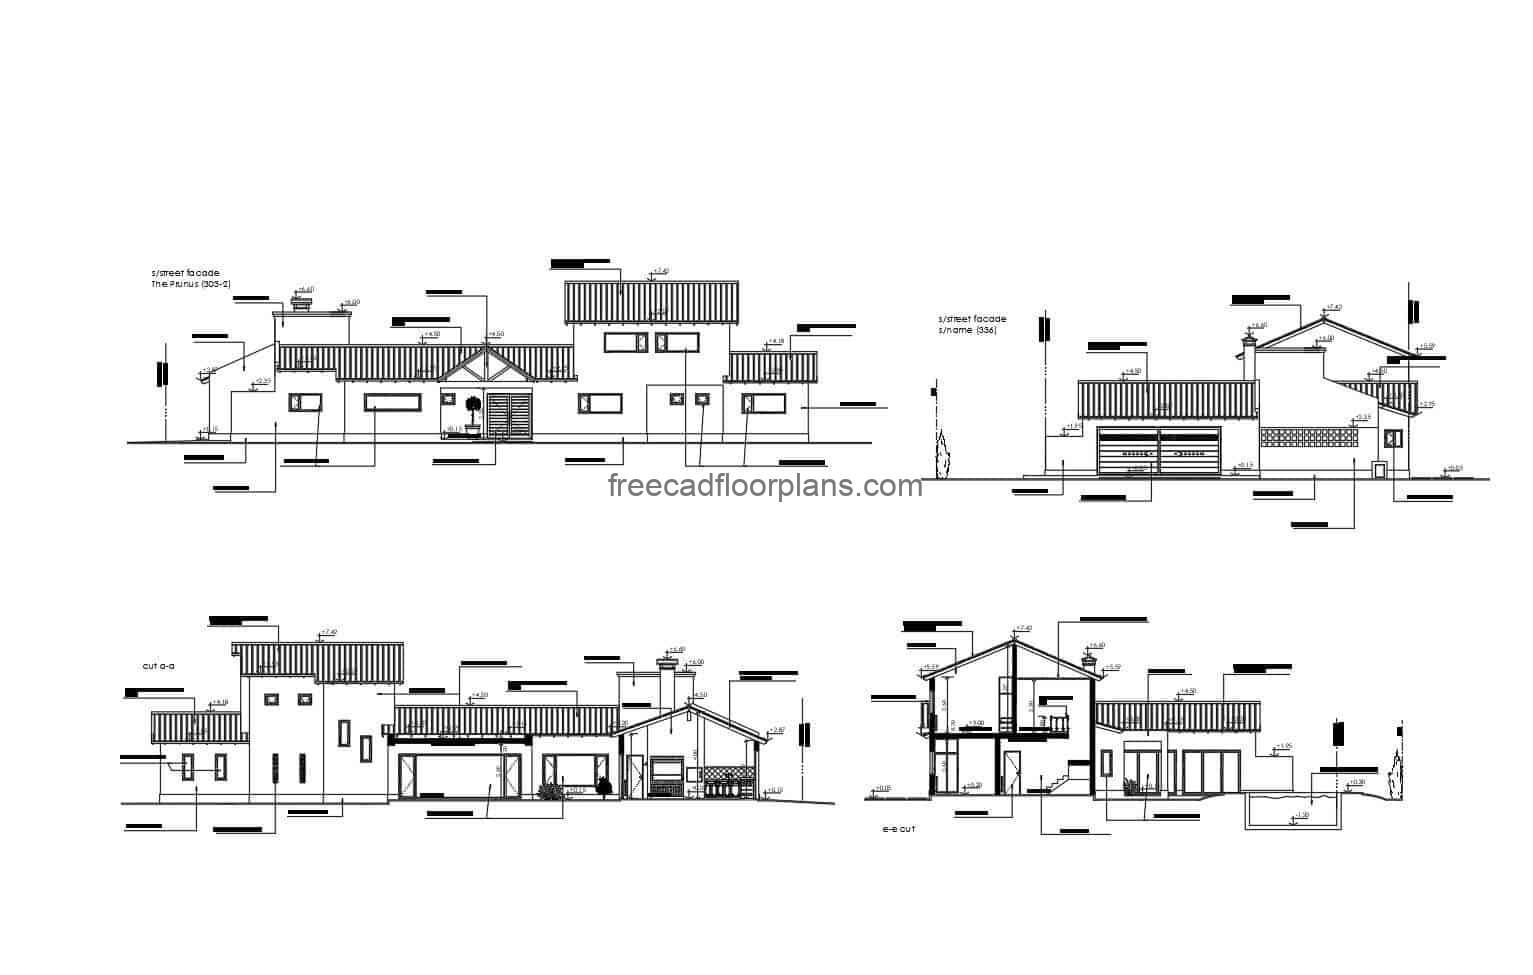 Architectural plans and complete draft of a two-storey country house in DWG format